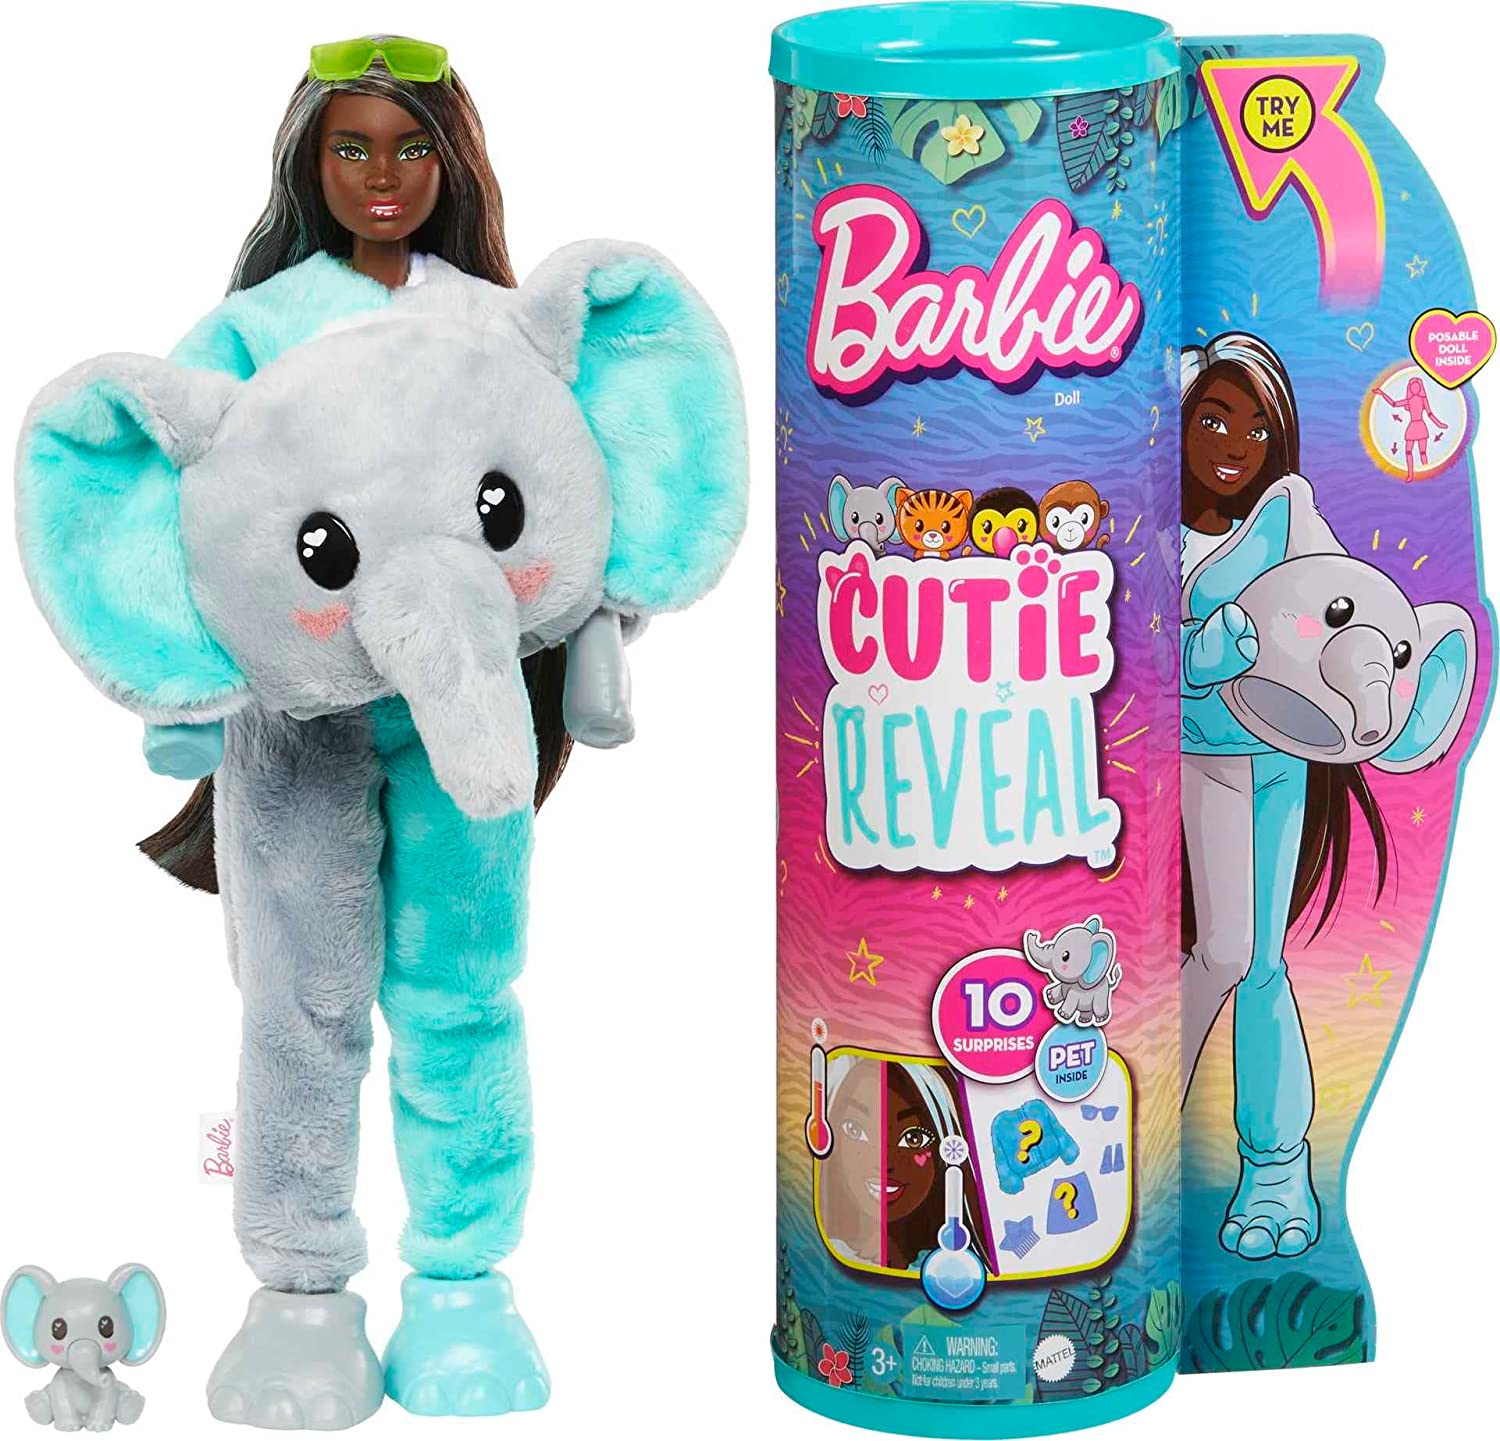 Barbie Cutie Reveal series 4 Jungle dolls: Tiger, Toucan, Elephant and